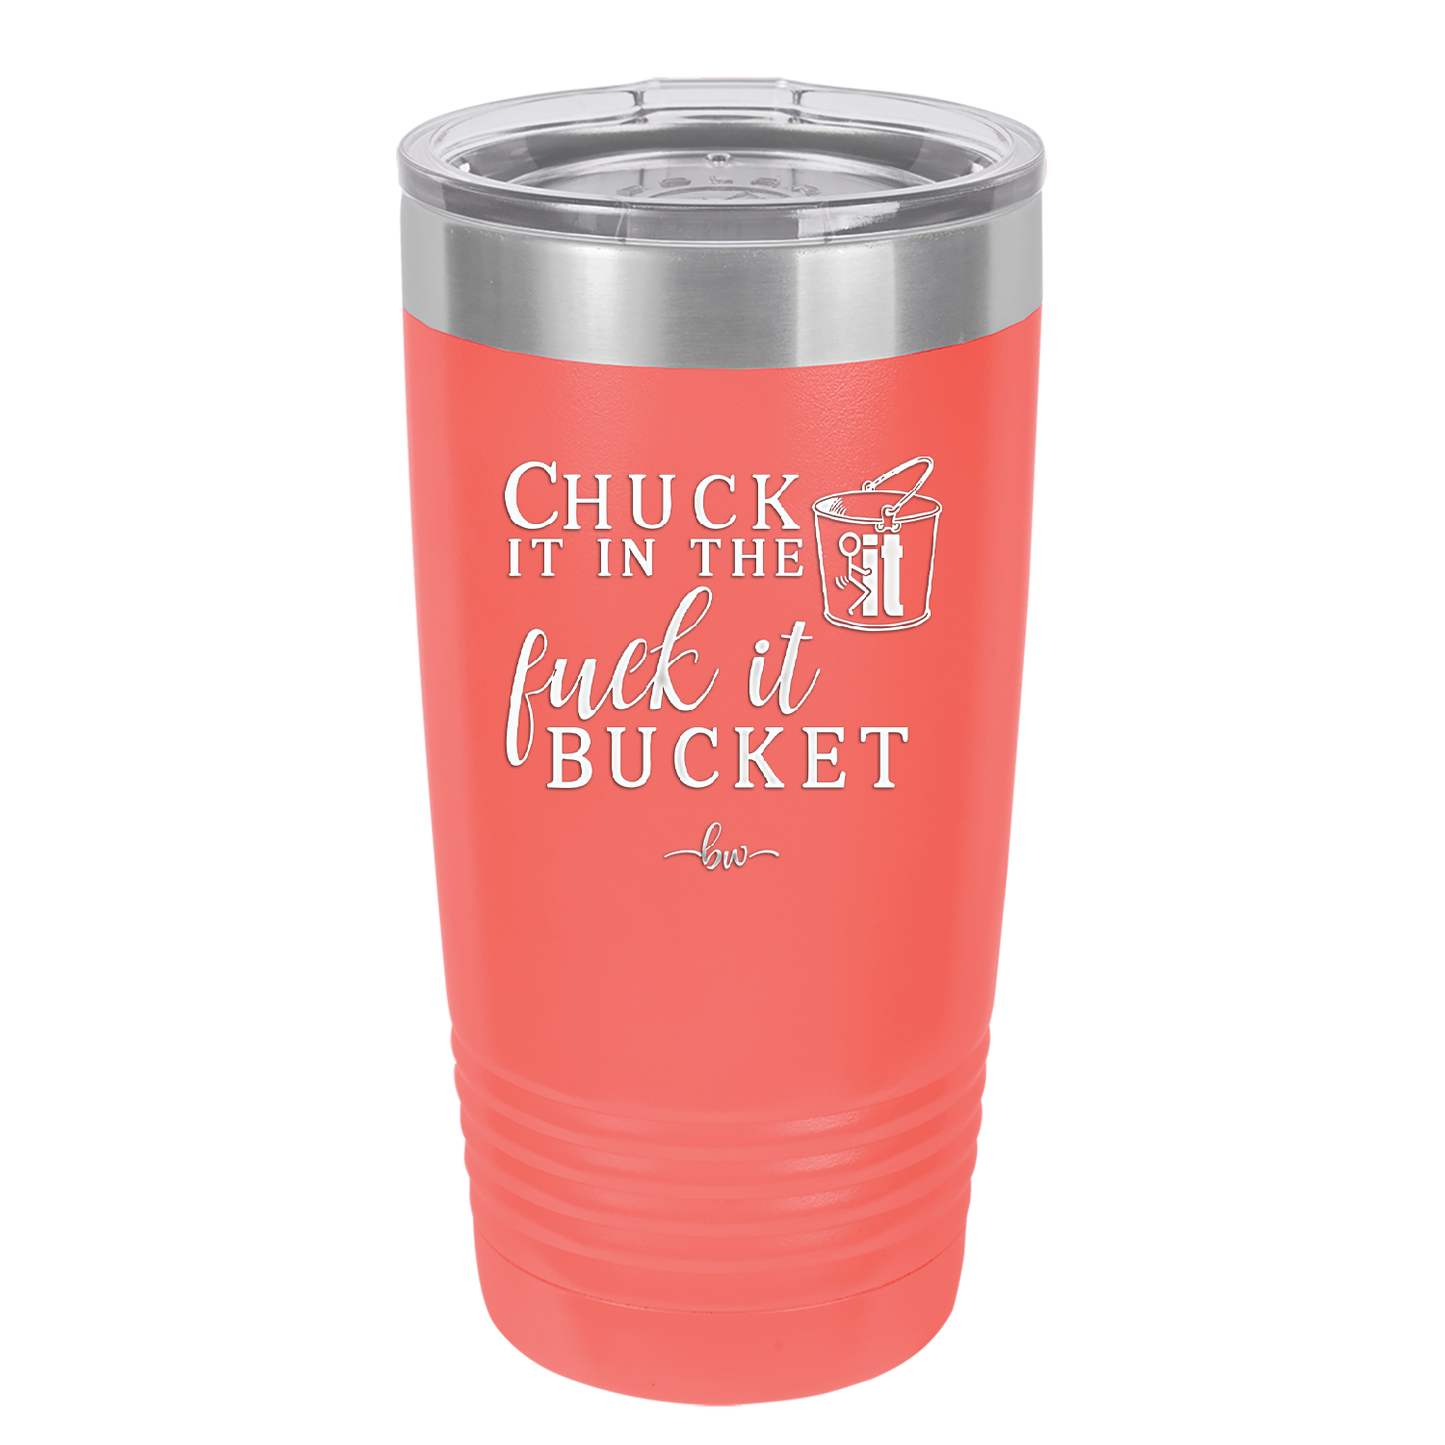 Chuck it in the Fuck it Bucket - Laser Engraved Stainless Steel Drinkware - 2246 -